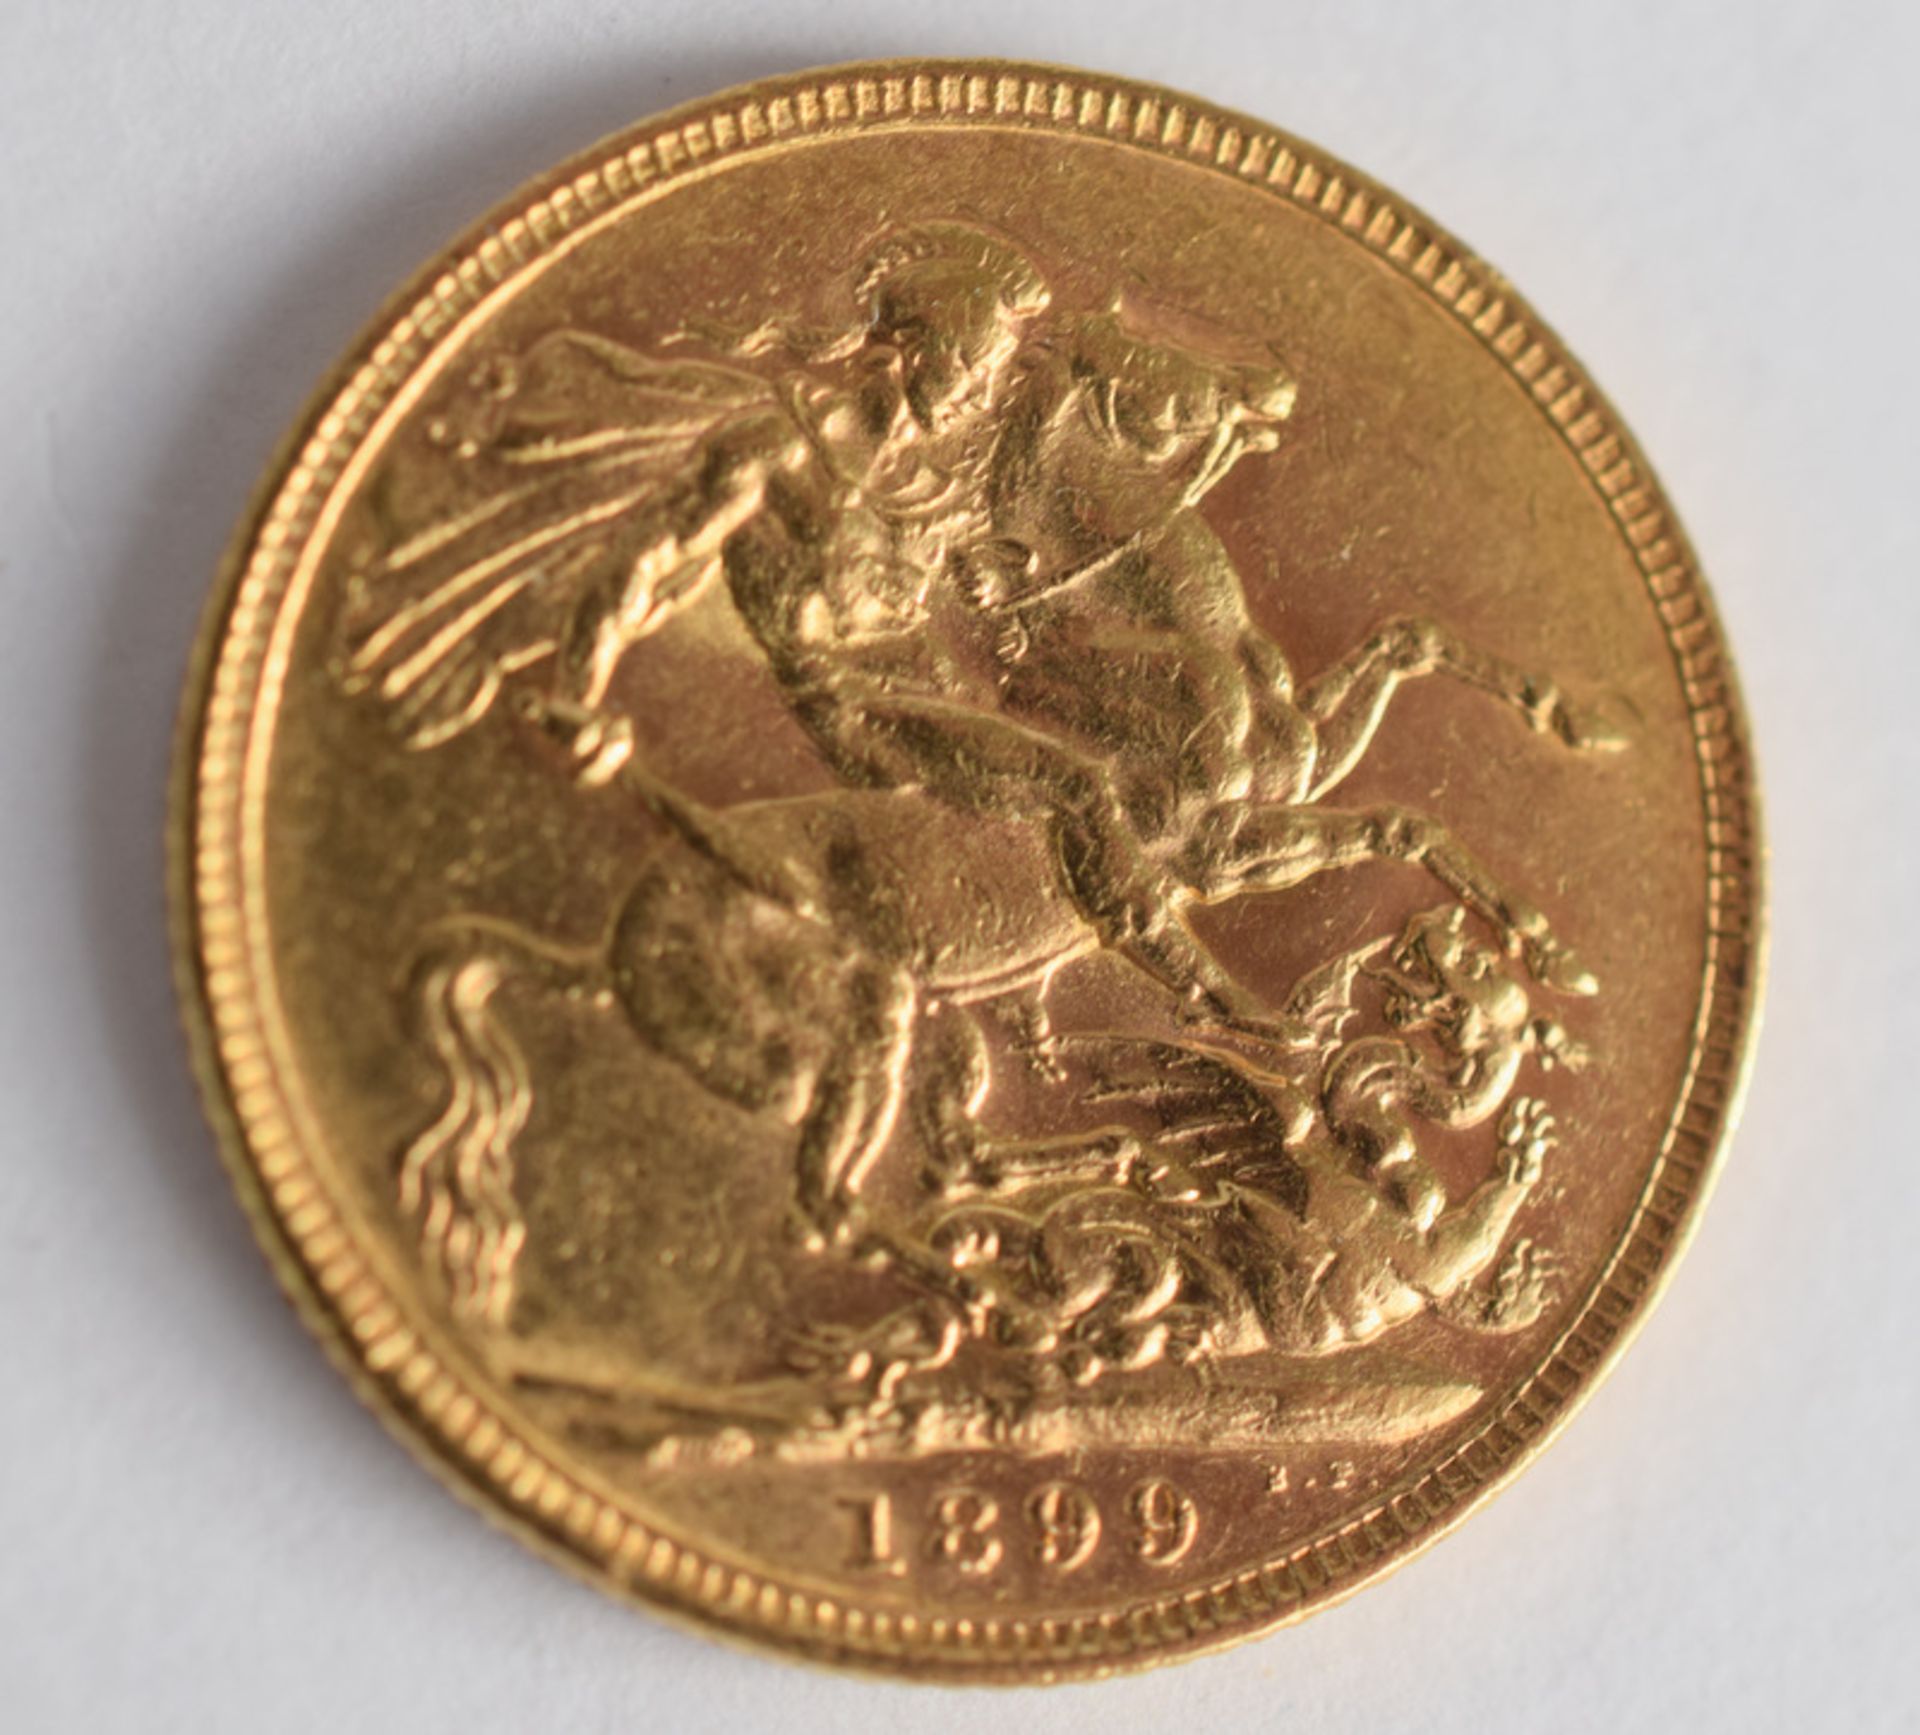 Victorian Gold Sovereign 1899 Melbourne Mint - Image 5 of 5